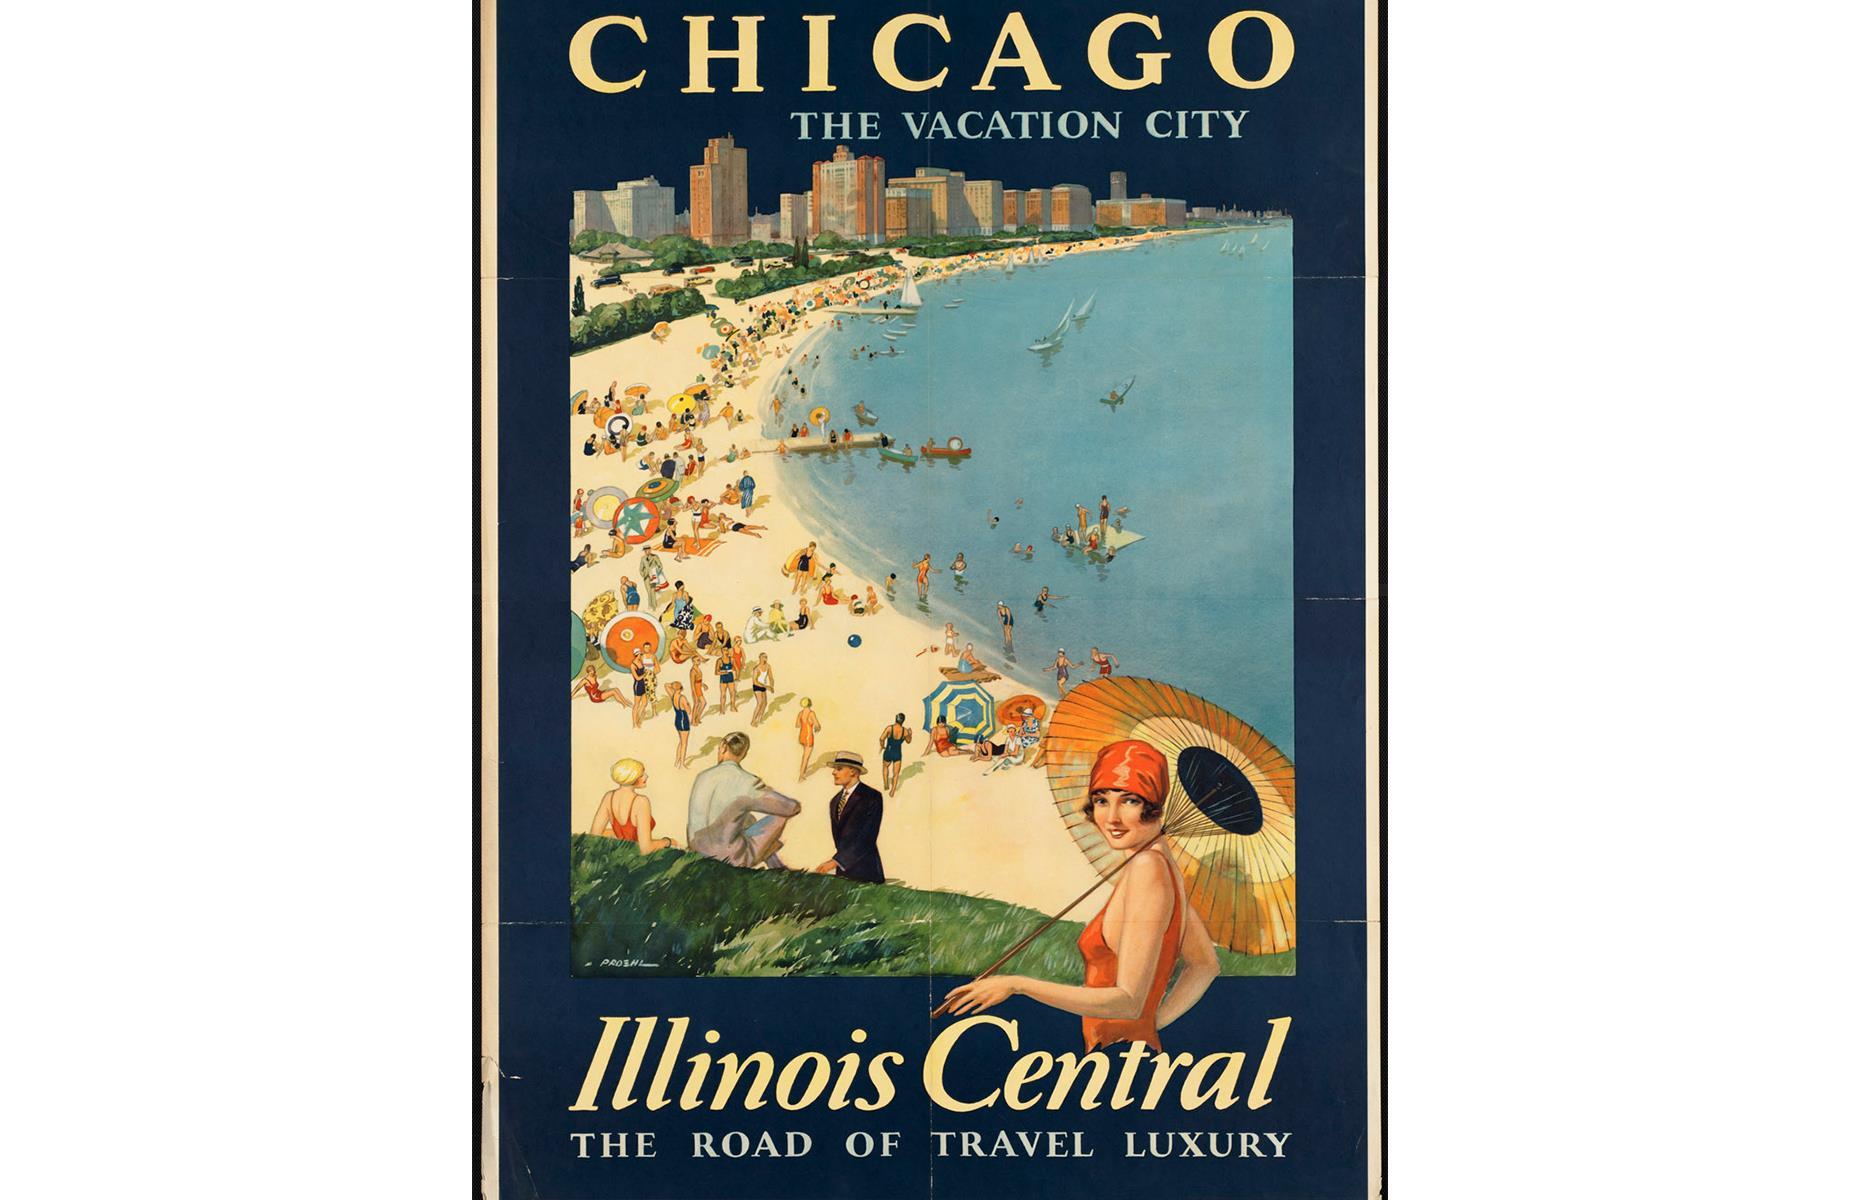 Chicago is dubbed the "Vacation City" in this advert from the Illinois Central Railroad Company. You can almost feel the buzz of Lake Michigan's sandy shores, which are studded with vacationers and hugged by soaring skyscrapers.